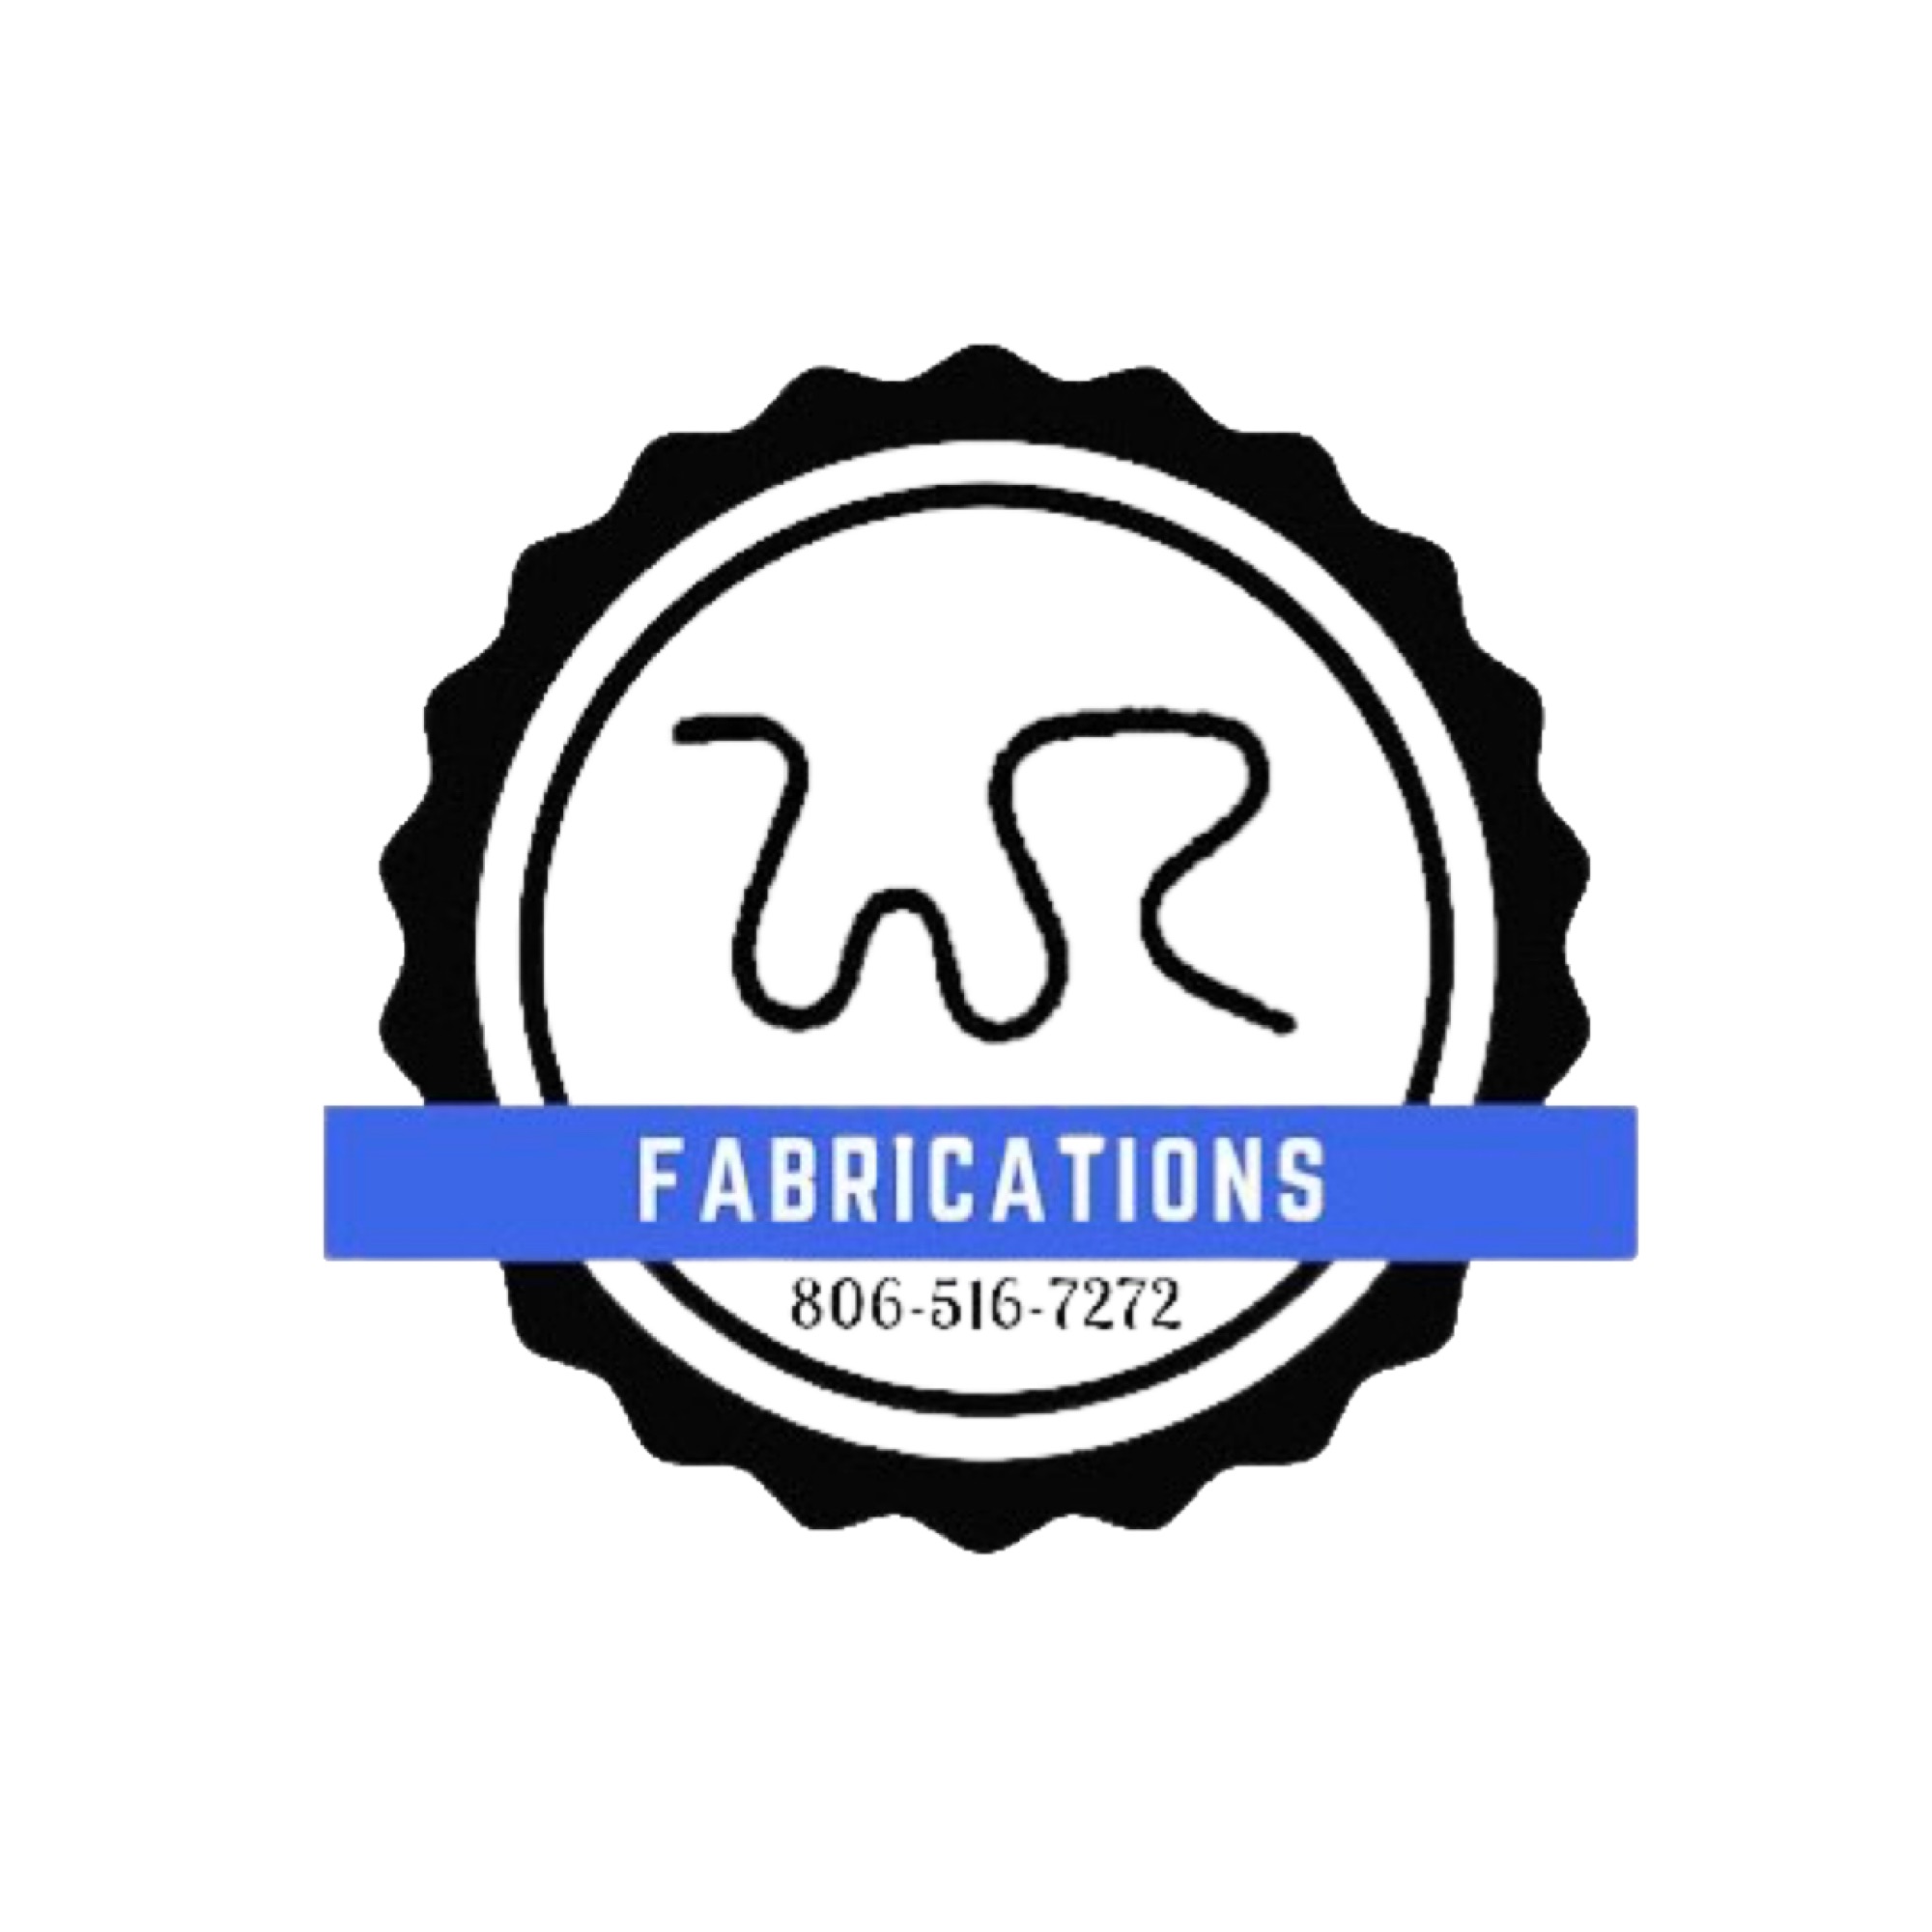 Welded Right Fabrications Logo